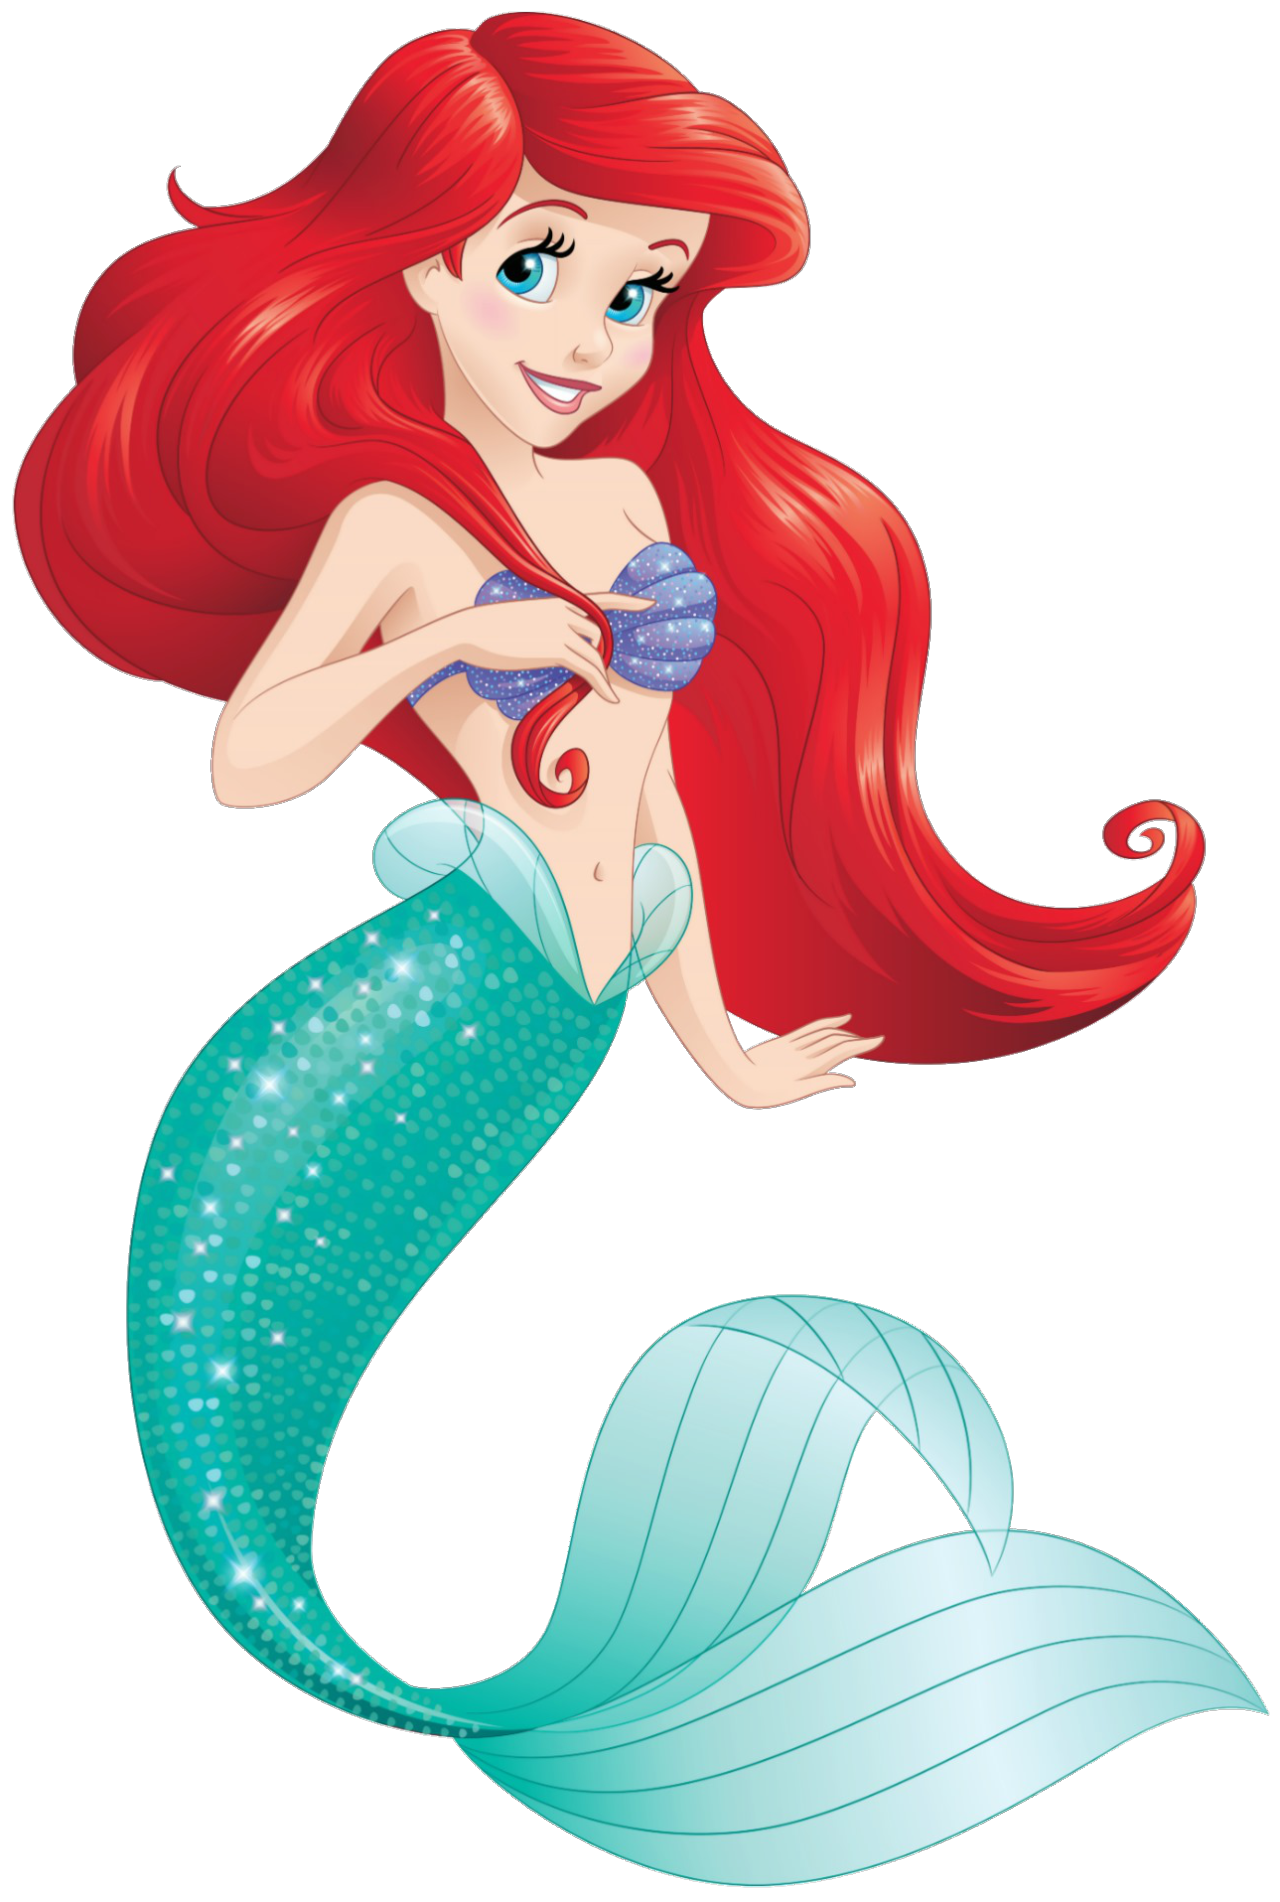 Transparent free only clipart. Mermaid png images